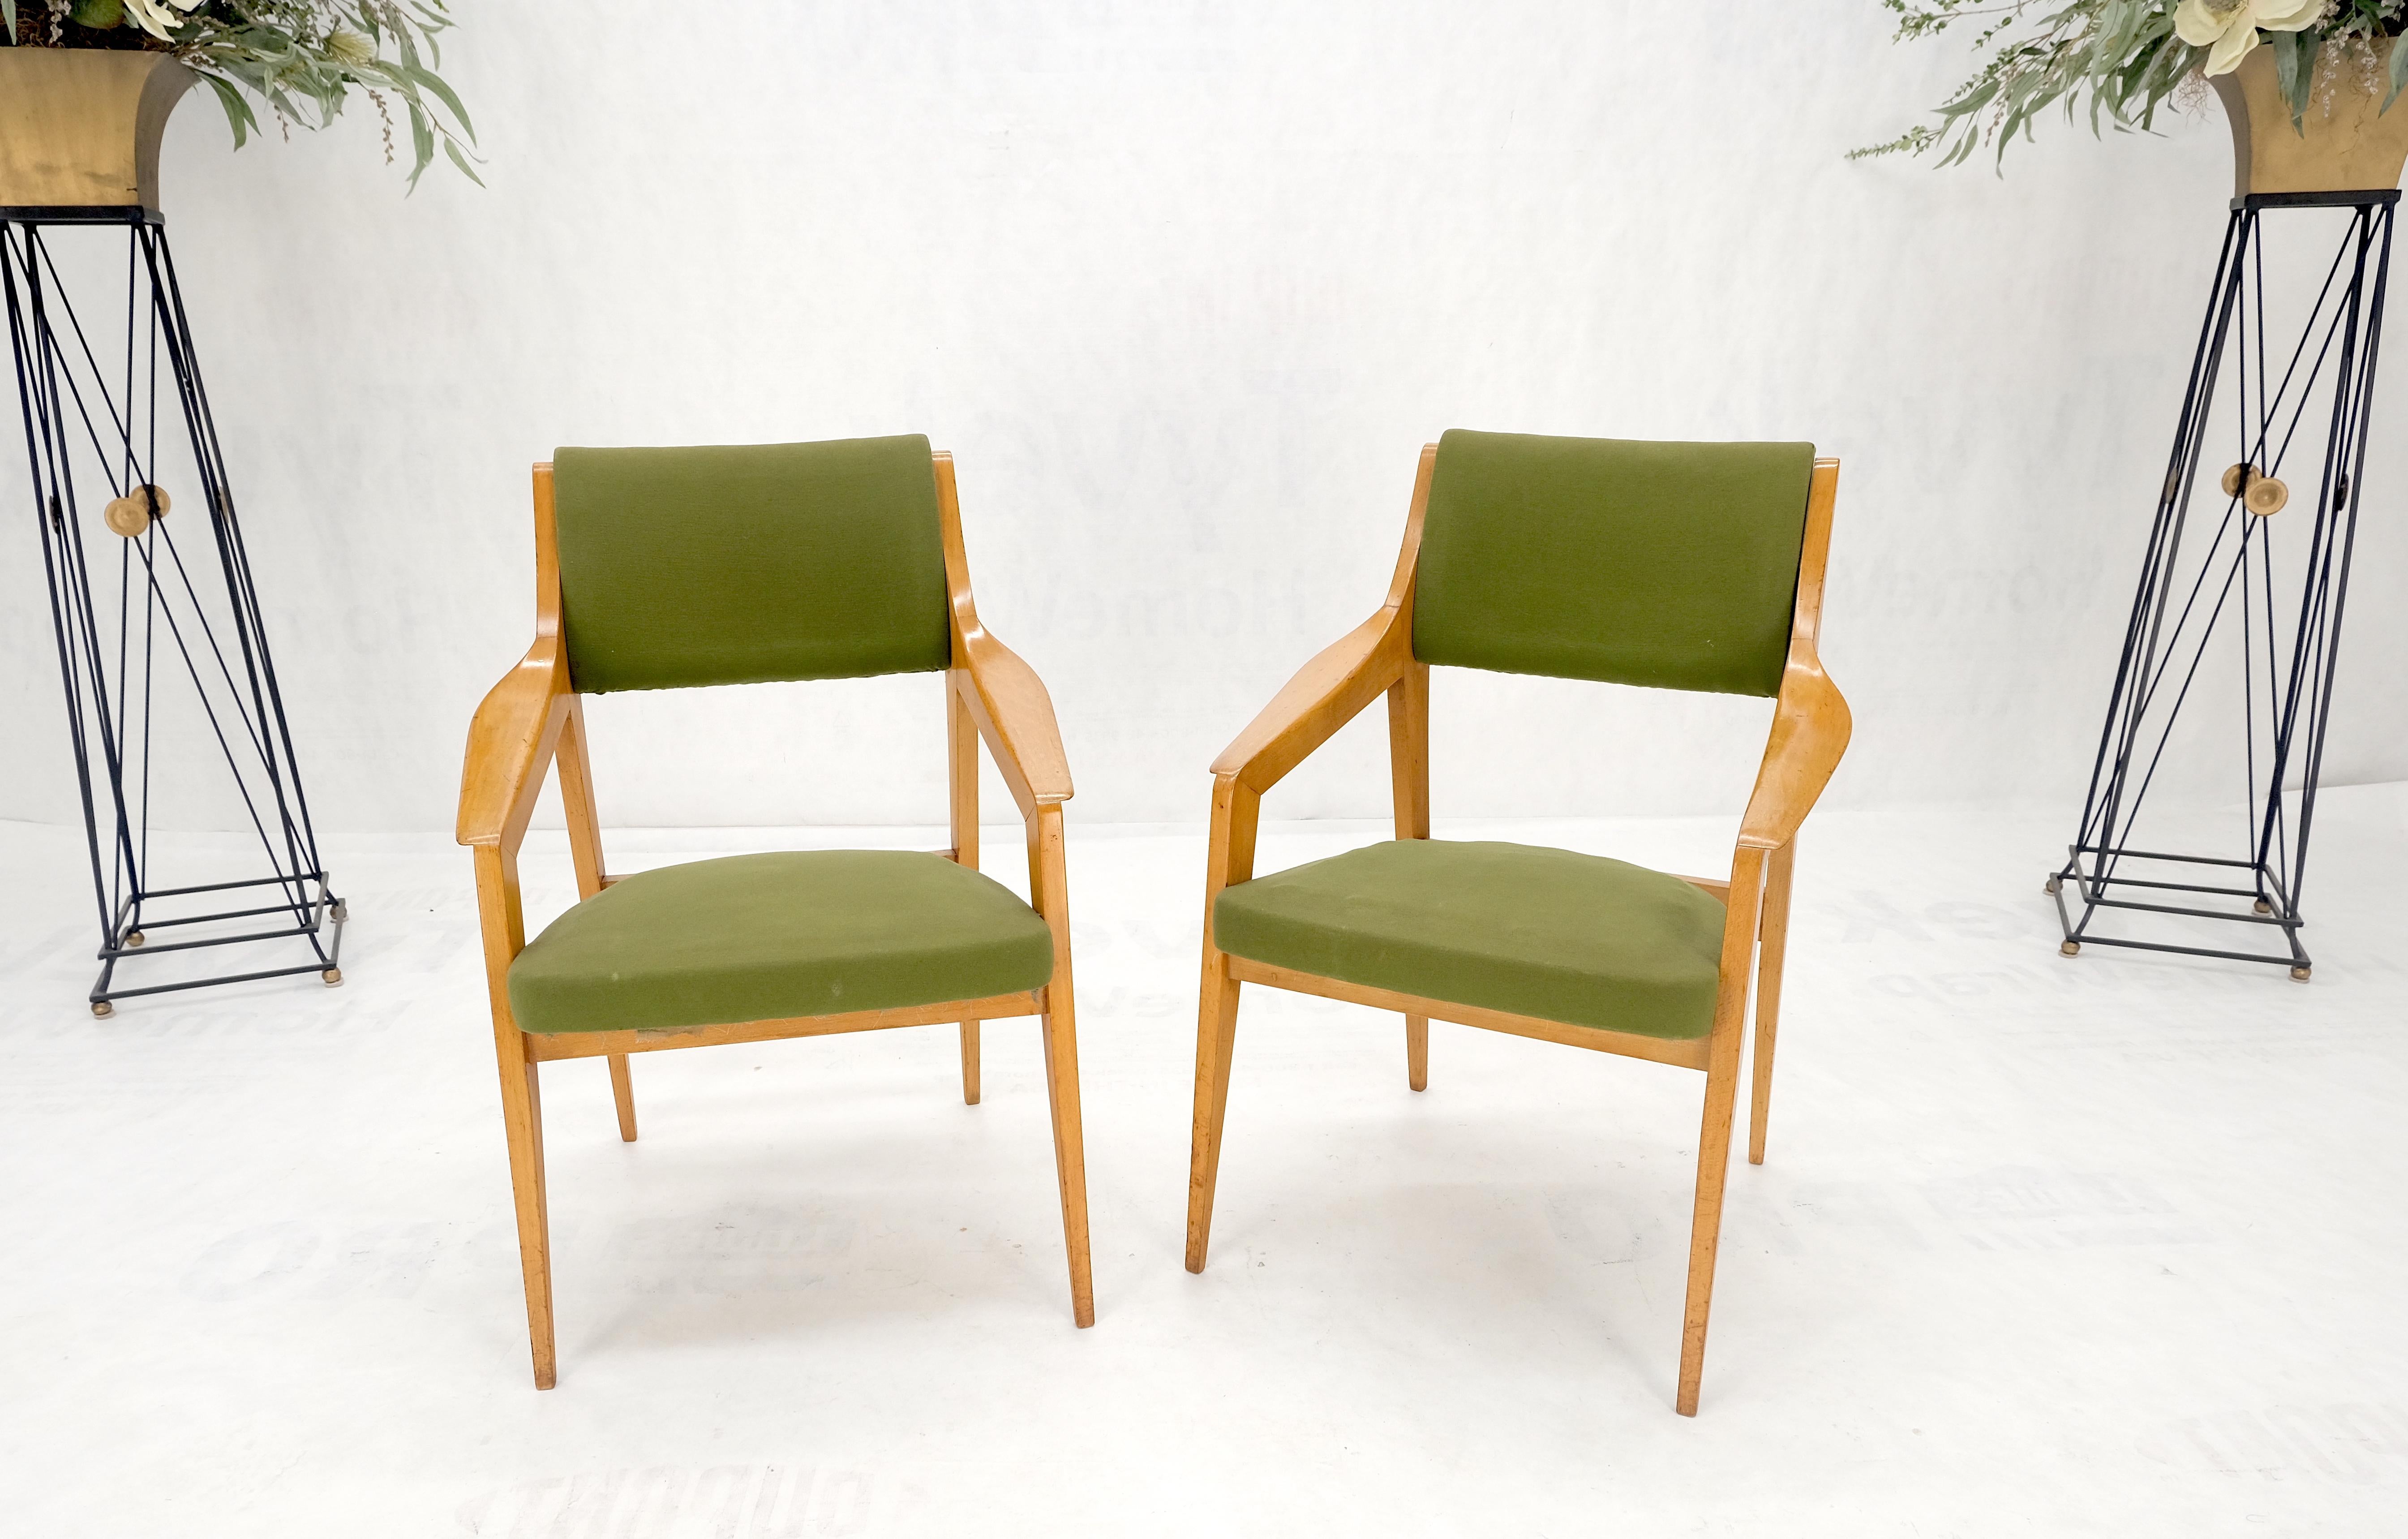 20th Century Pair of c1950s Blond Birch Scandinavian Swedish Arm Chairs Green Upholstery For Sale